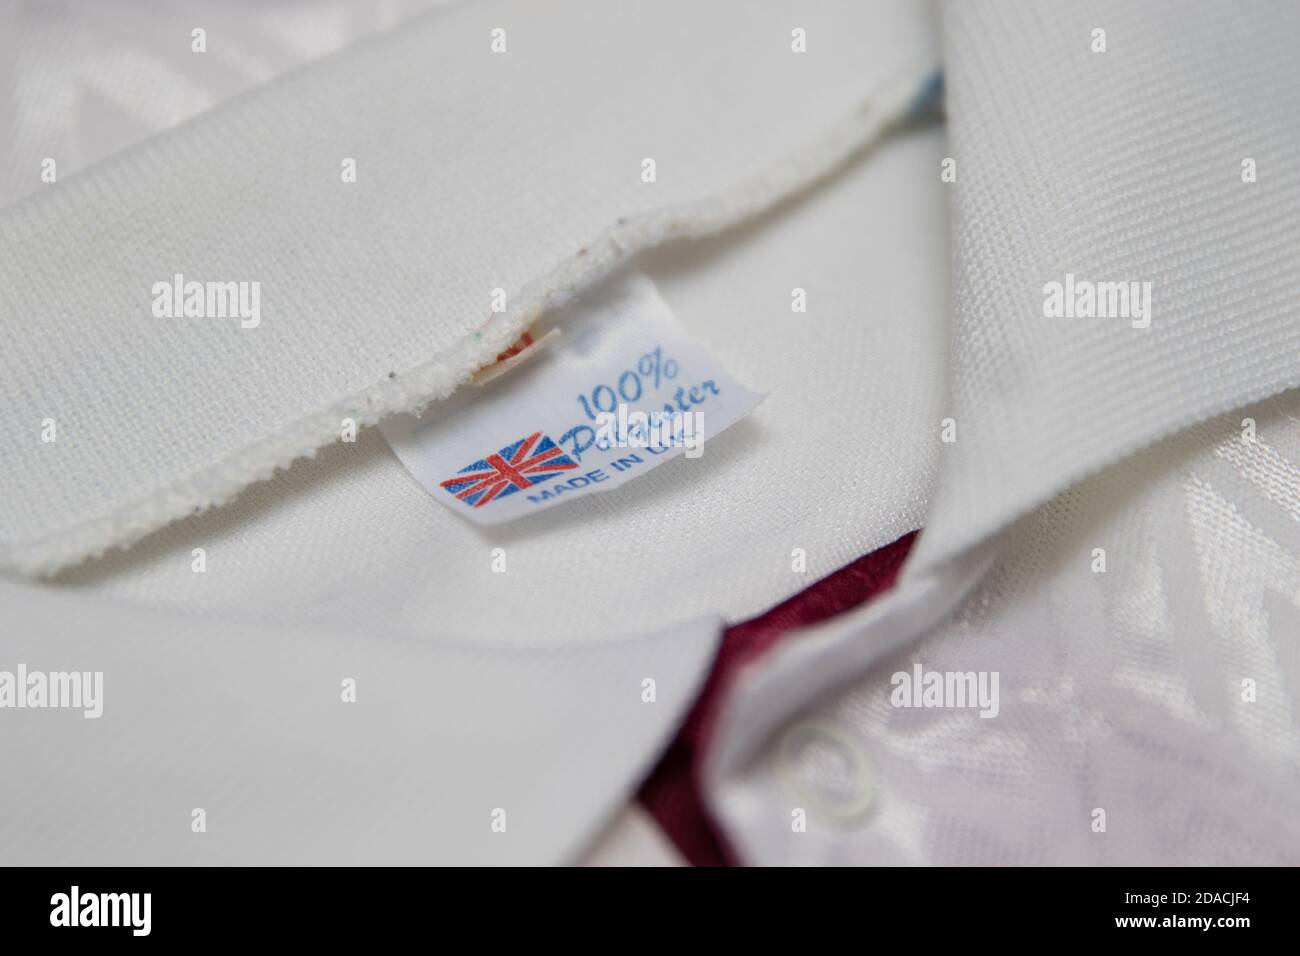 100% Polyester Made in UK label in a white sports shirt Stock Photo